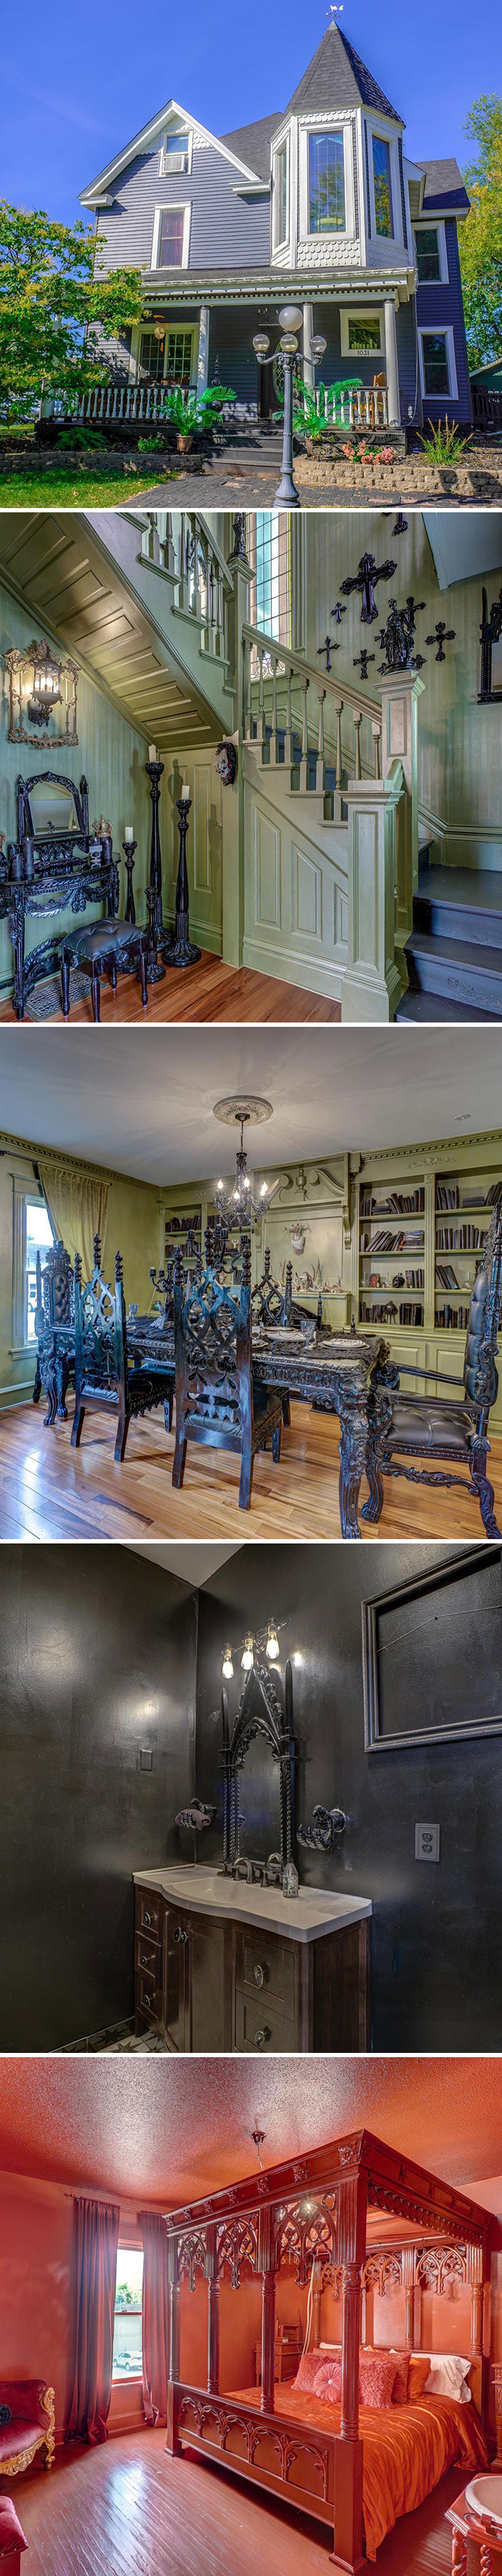 This Home Is The Goth Castle Of Your Dreams. It Has Goth Everything Including A Goth Living Room, Goth Dining Room With Goth Library, Even A Special Blood Red Bedroom. Currently Listed For $1.1 Million In Hudson, Wi. 7 Bd, 5 Ba. 5,611 Sq Ft